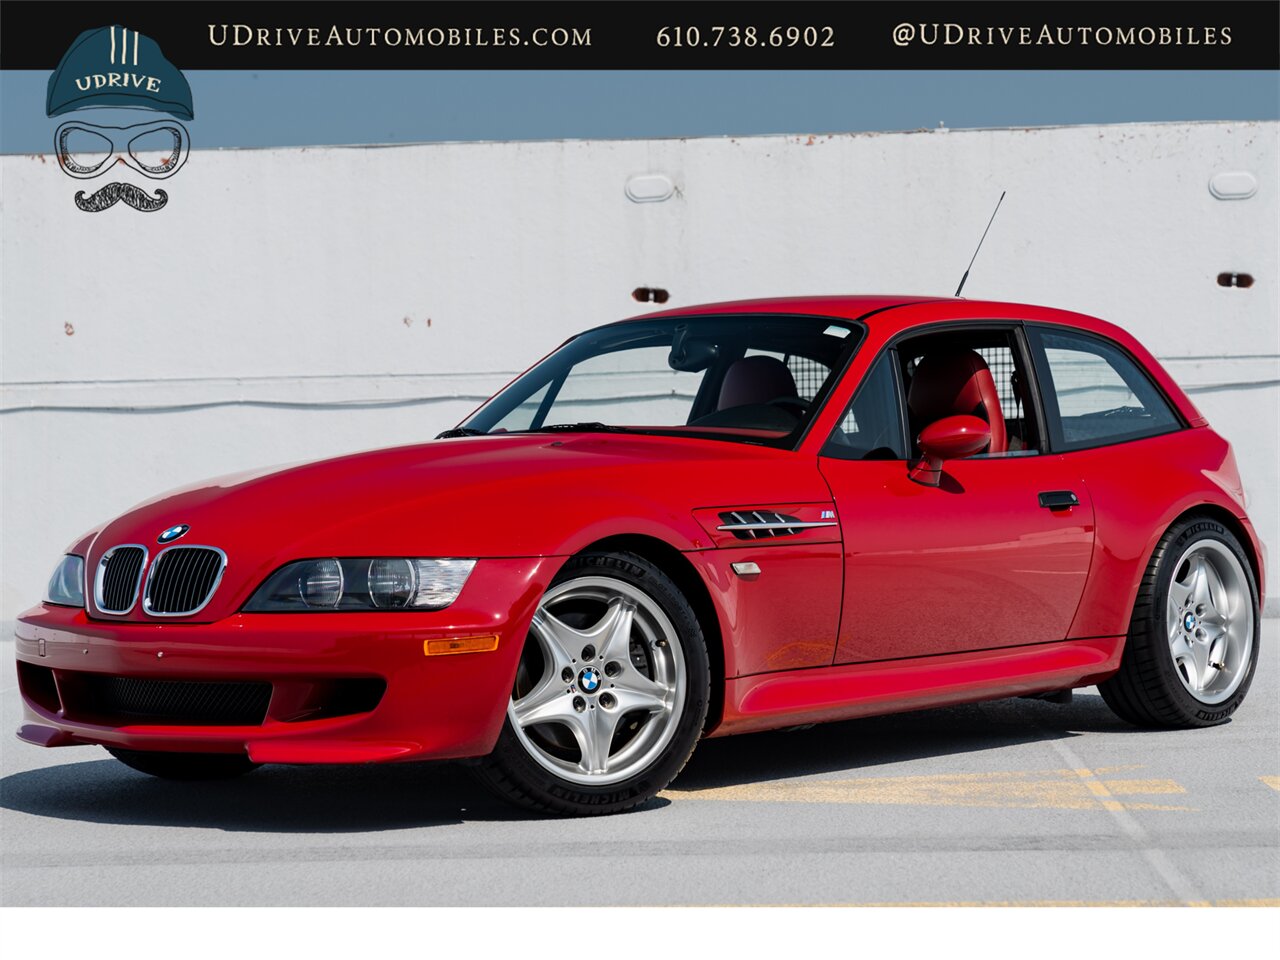 2000 BMW Z3 M  Coupe 25k Miles  Sunroof Delete $4k Recent Service - Photo 1 - West Chester, PA 19382